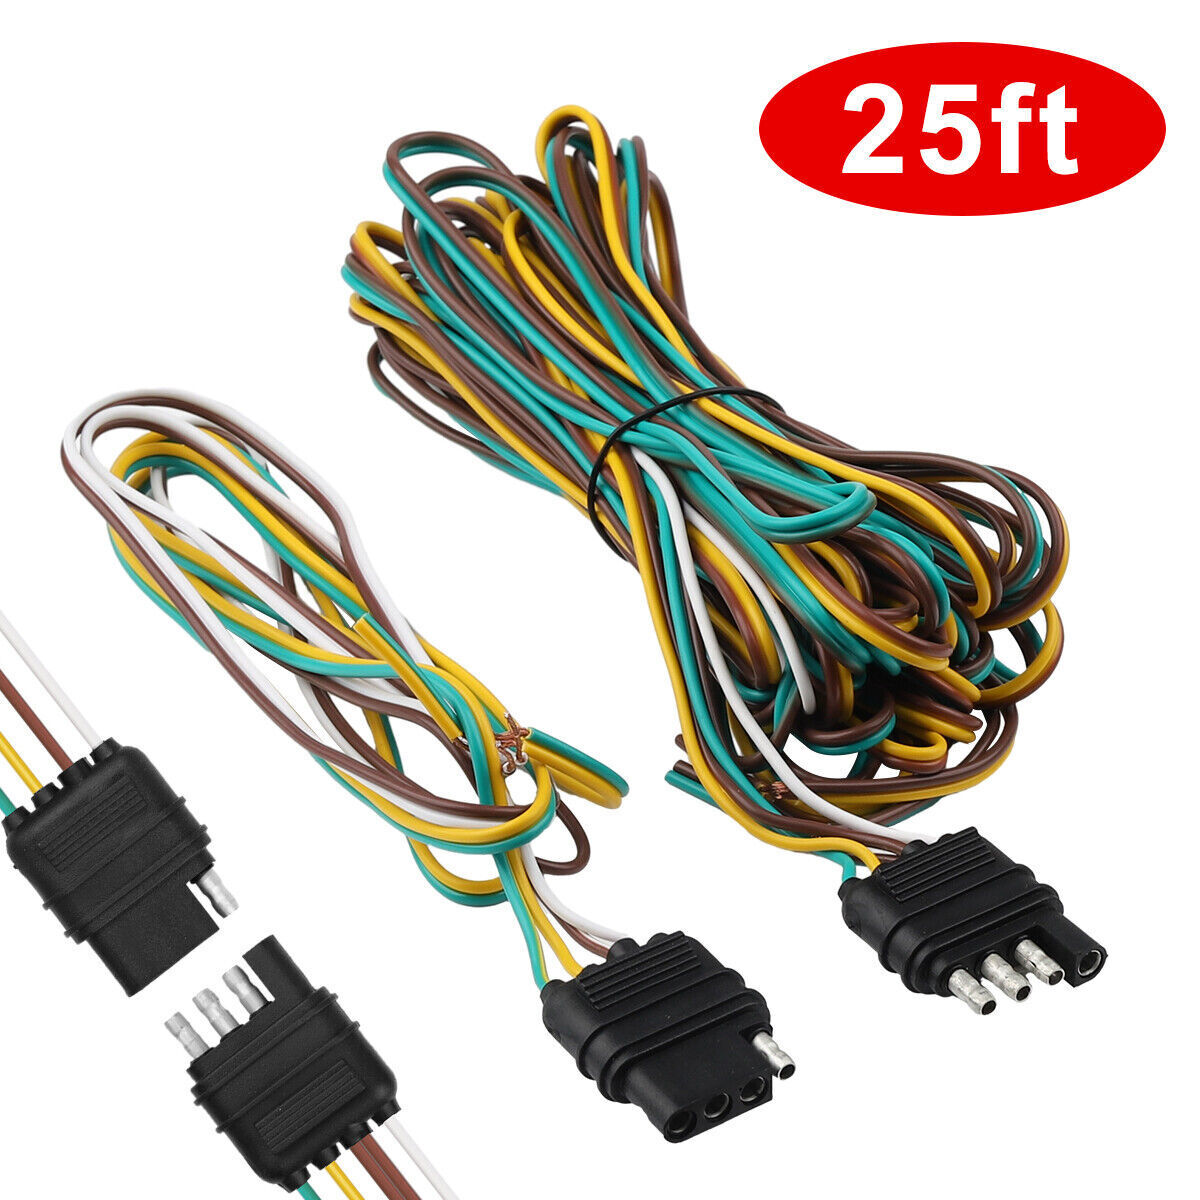 25\' 4 Pin Flat Trailer Wiring Harness Kit Wishbone Style for Trailer Tail Lights